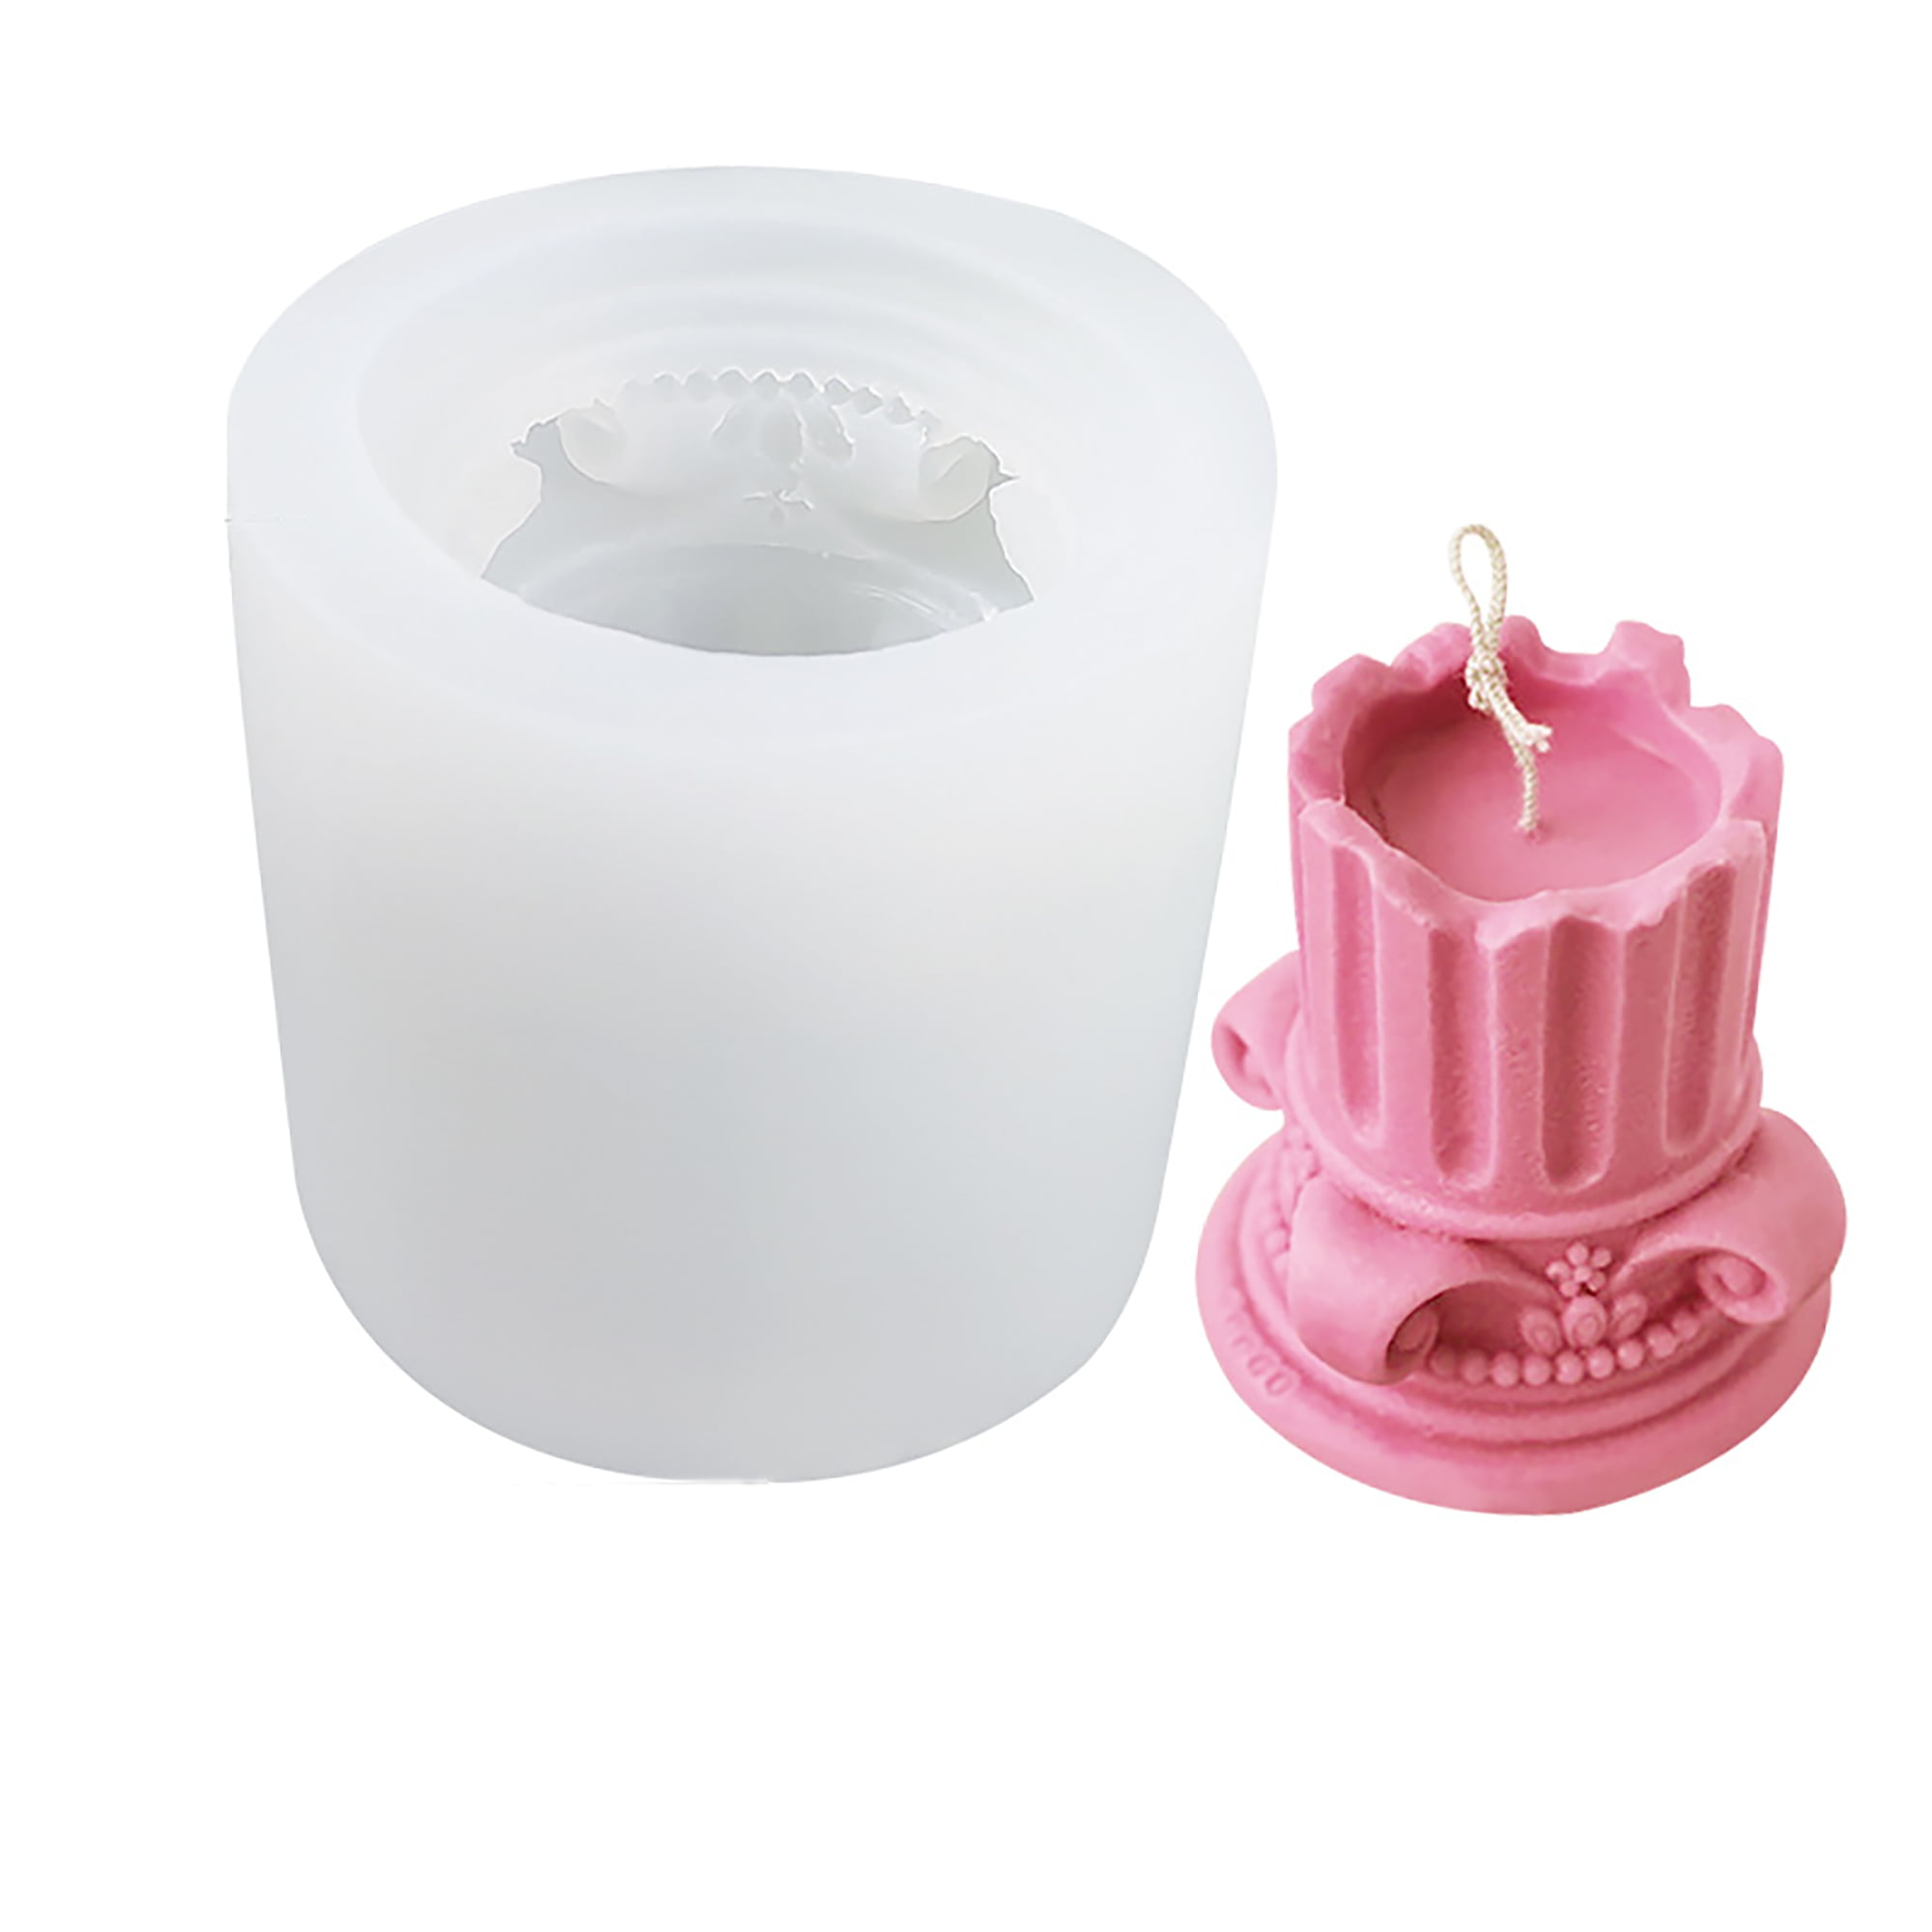 Details about   Lotus 3D Silicone Cake Fondant Mold Wax Clay Soap Candle Making Mould Tool Craft 